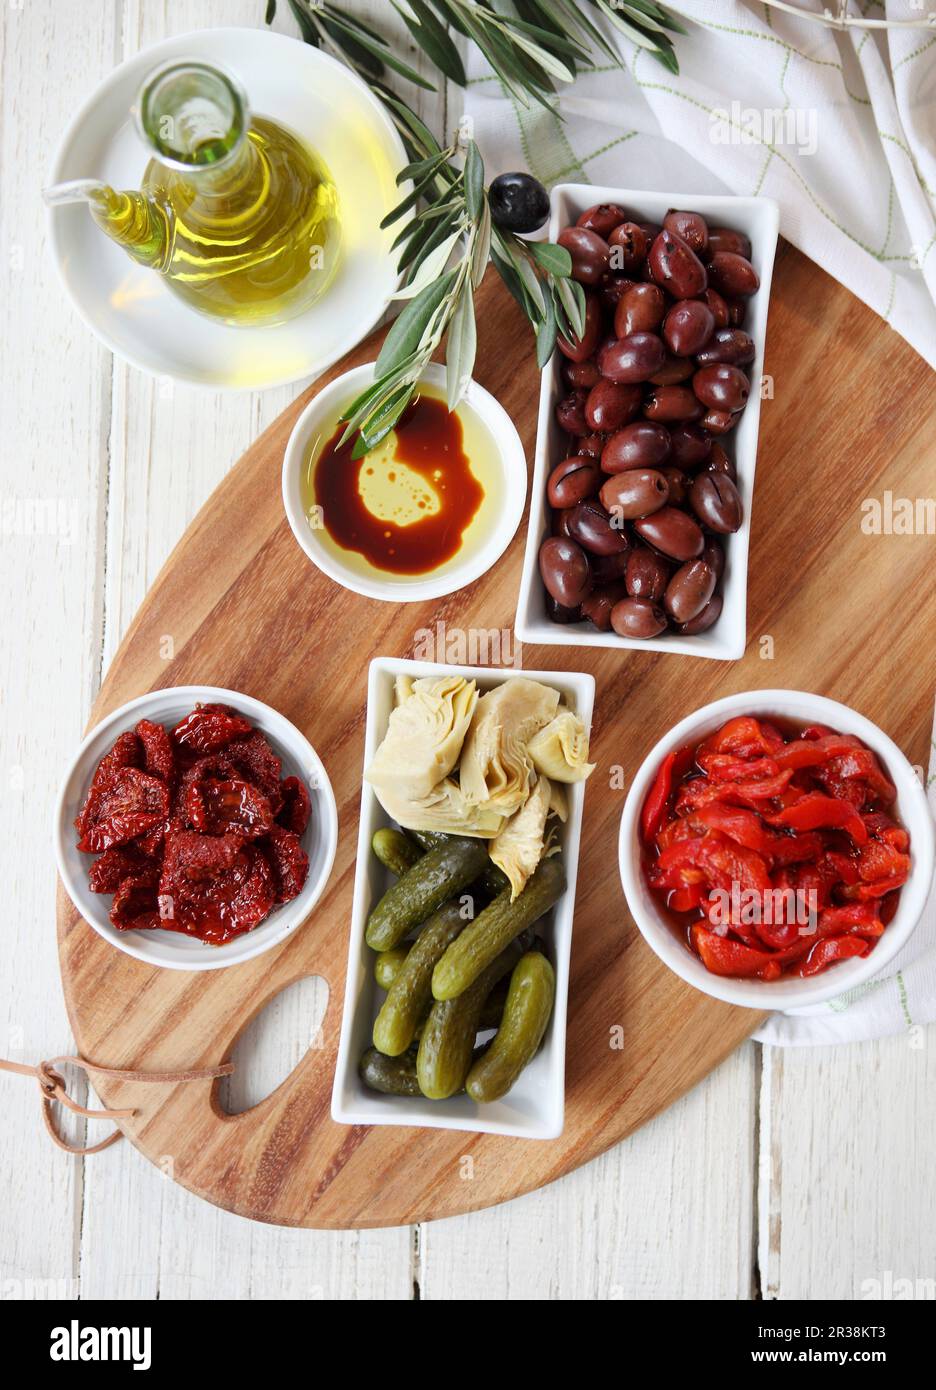 Antipasto dish - sun-dried tomatoes and capsicum, kalamata olives, gherkins, artichokes, Bread rolls, olive oil (with balsamic vinegar)and olive branc Stock Photo